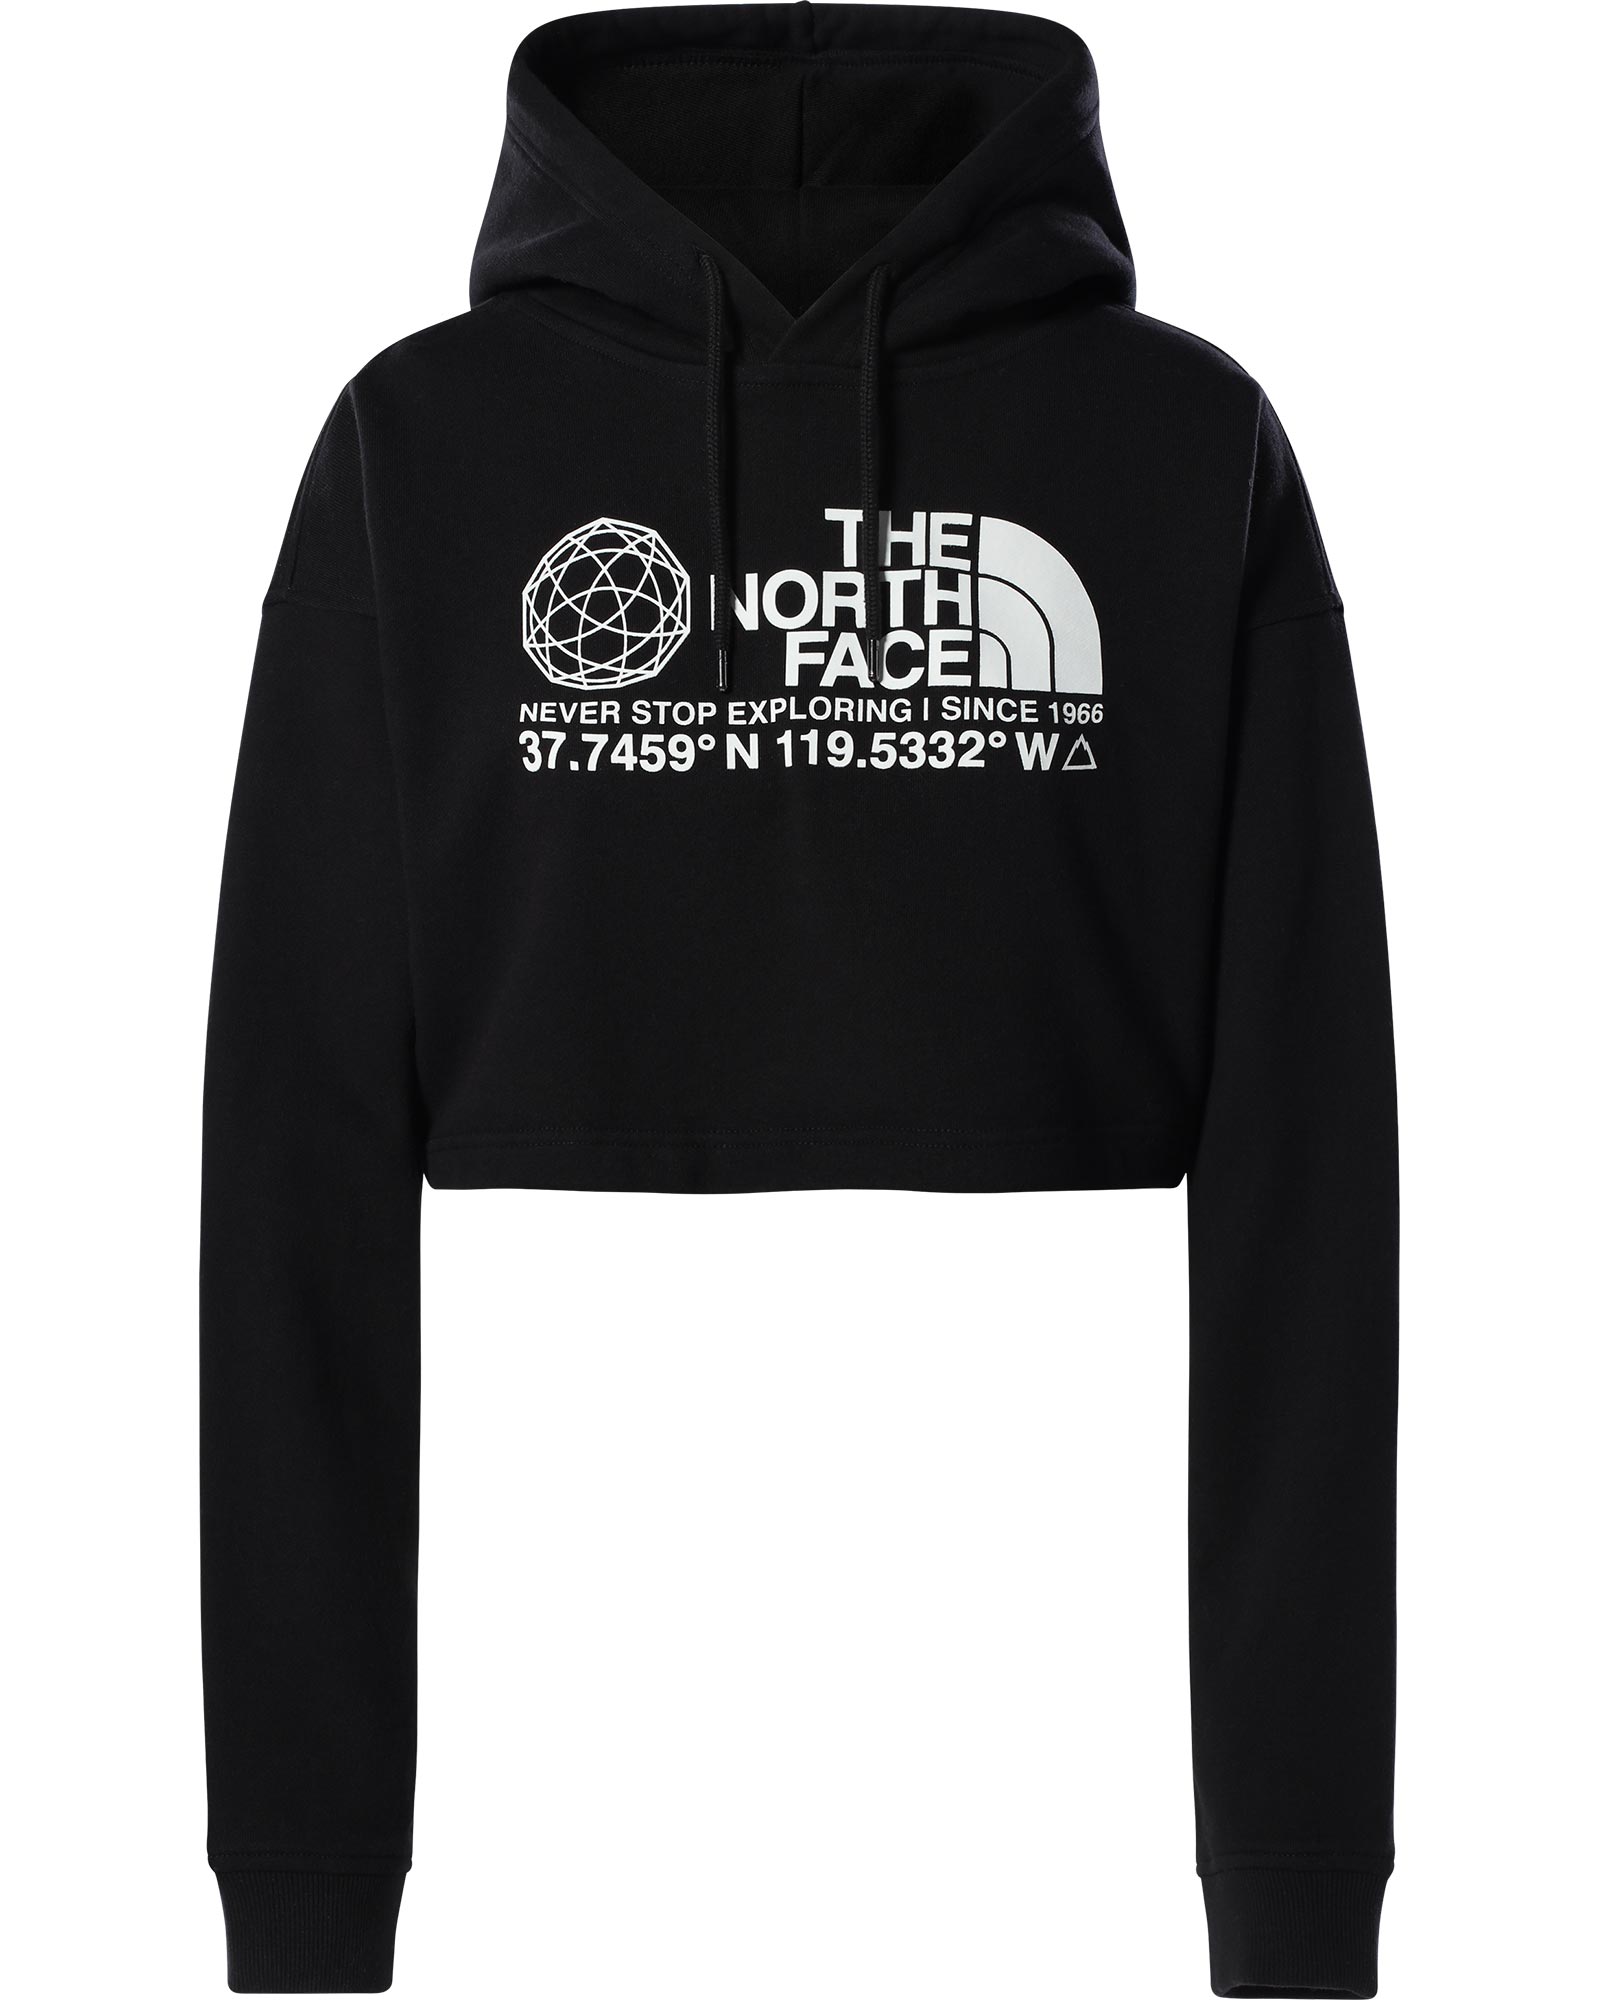 The North Face Coordinates Crop Drop Pullover Women’s Hoodie - TNF Black XS